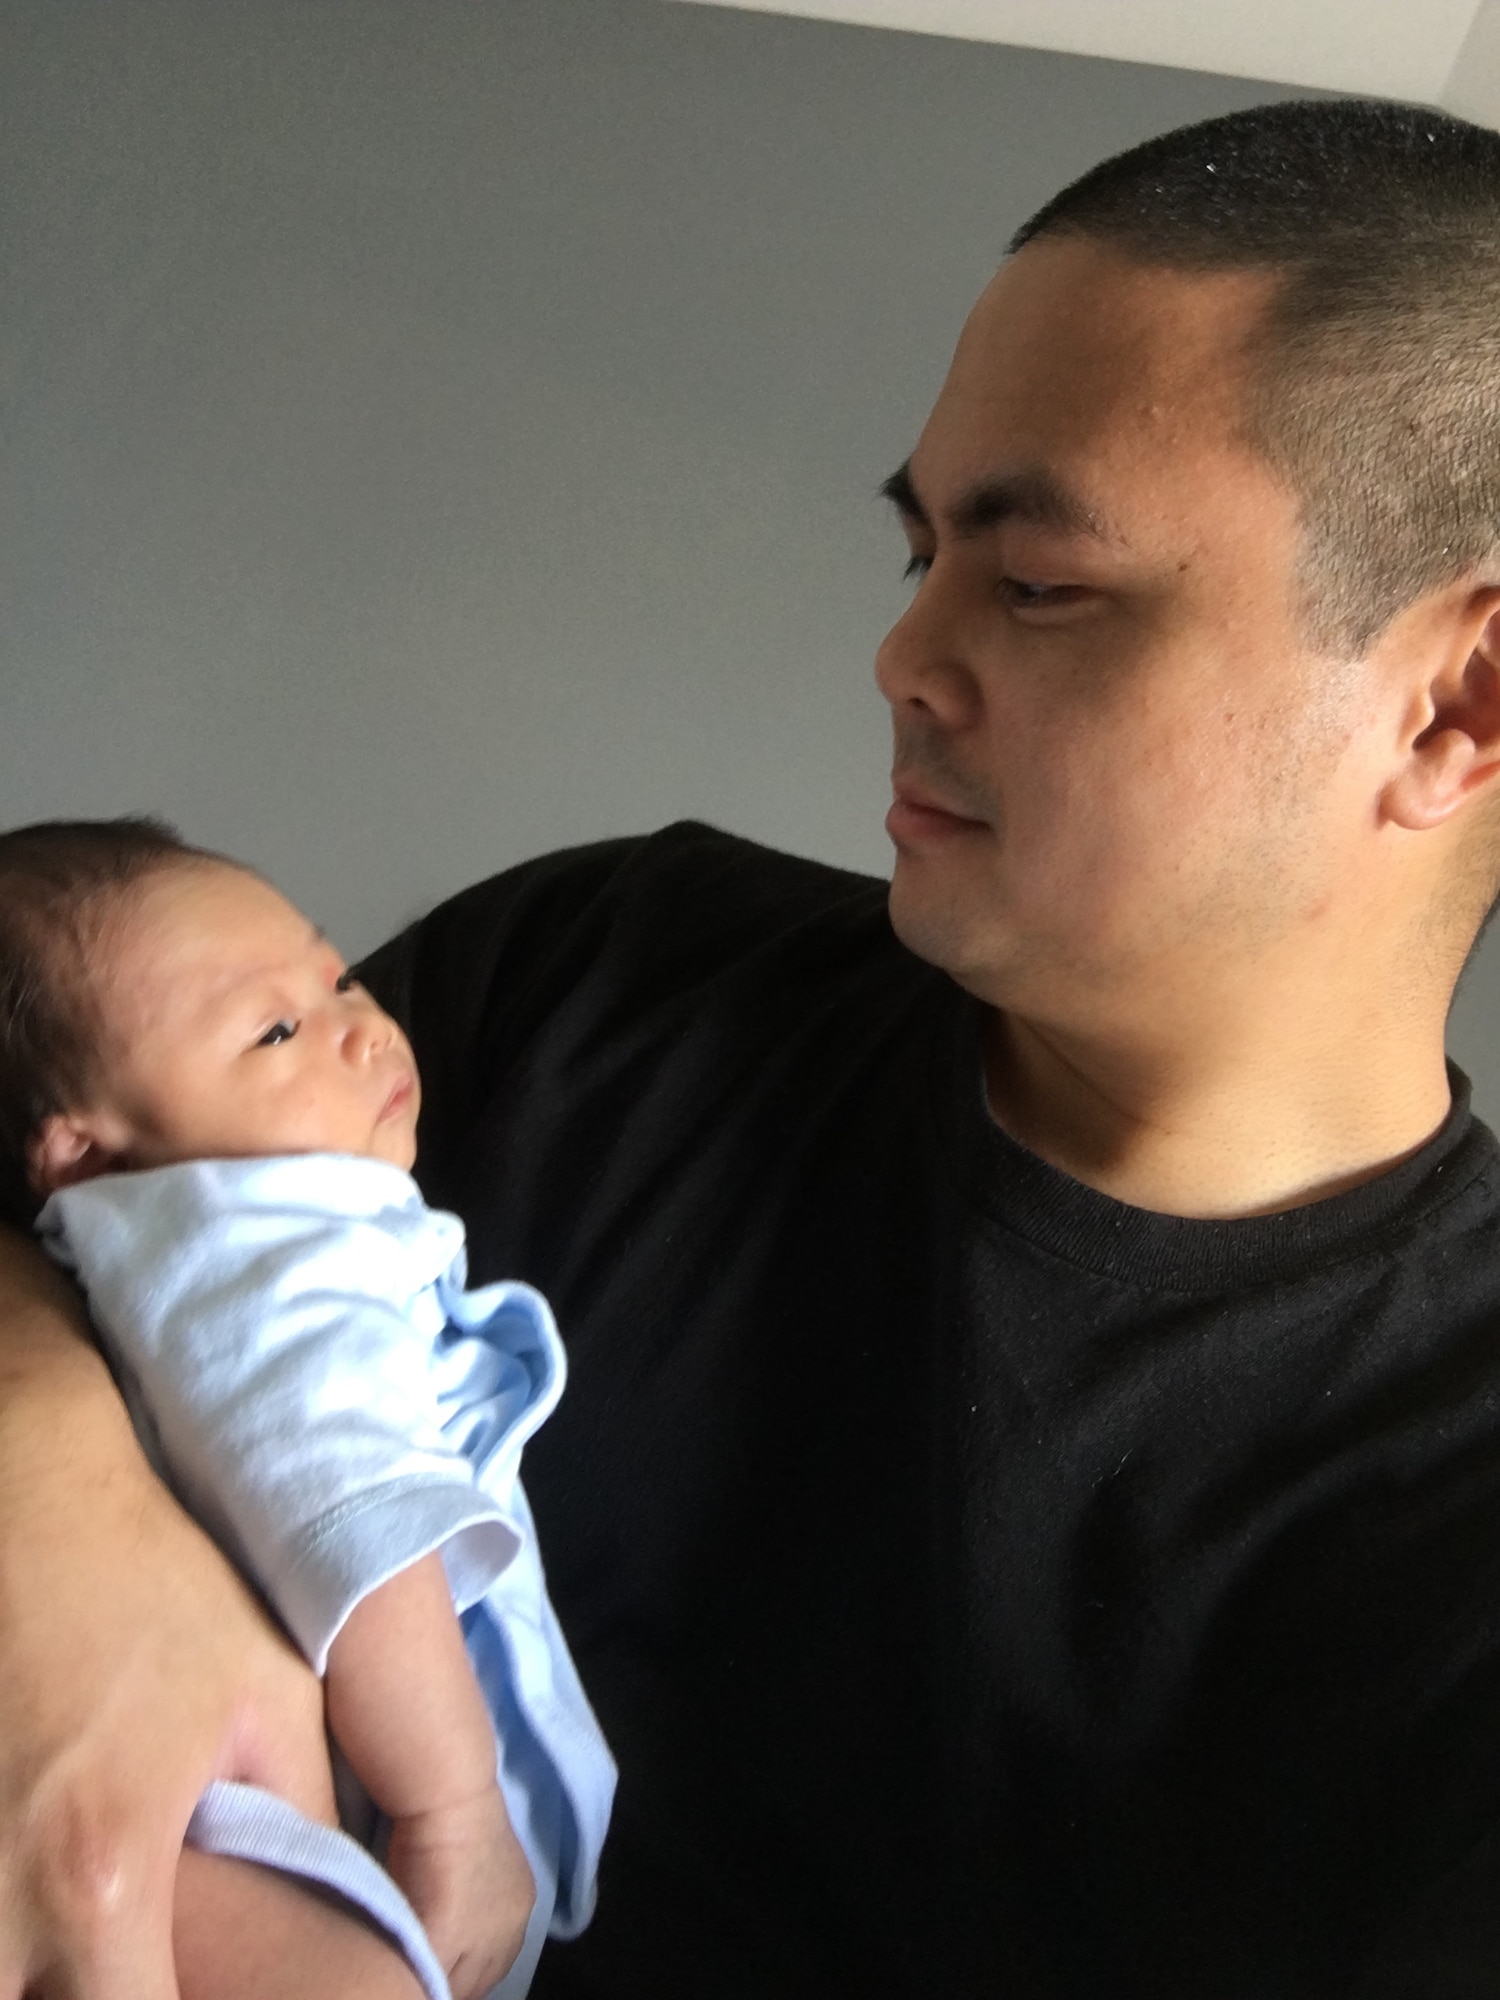 Master Sgt. Matthew Alejandro, 844th Communications Squadron executive team member, holds his newborn, Sean, after emerging from quarantine. Undated photo. (U.S. Air Force photo/ Master Sgt. Matthew Alejandro)